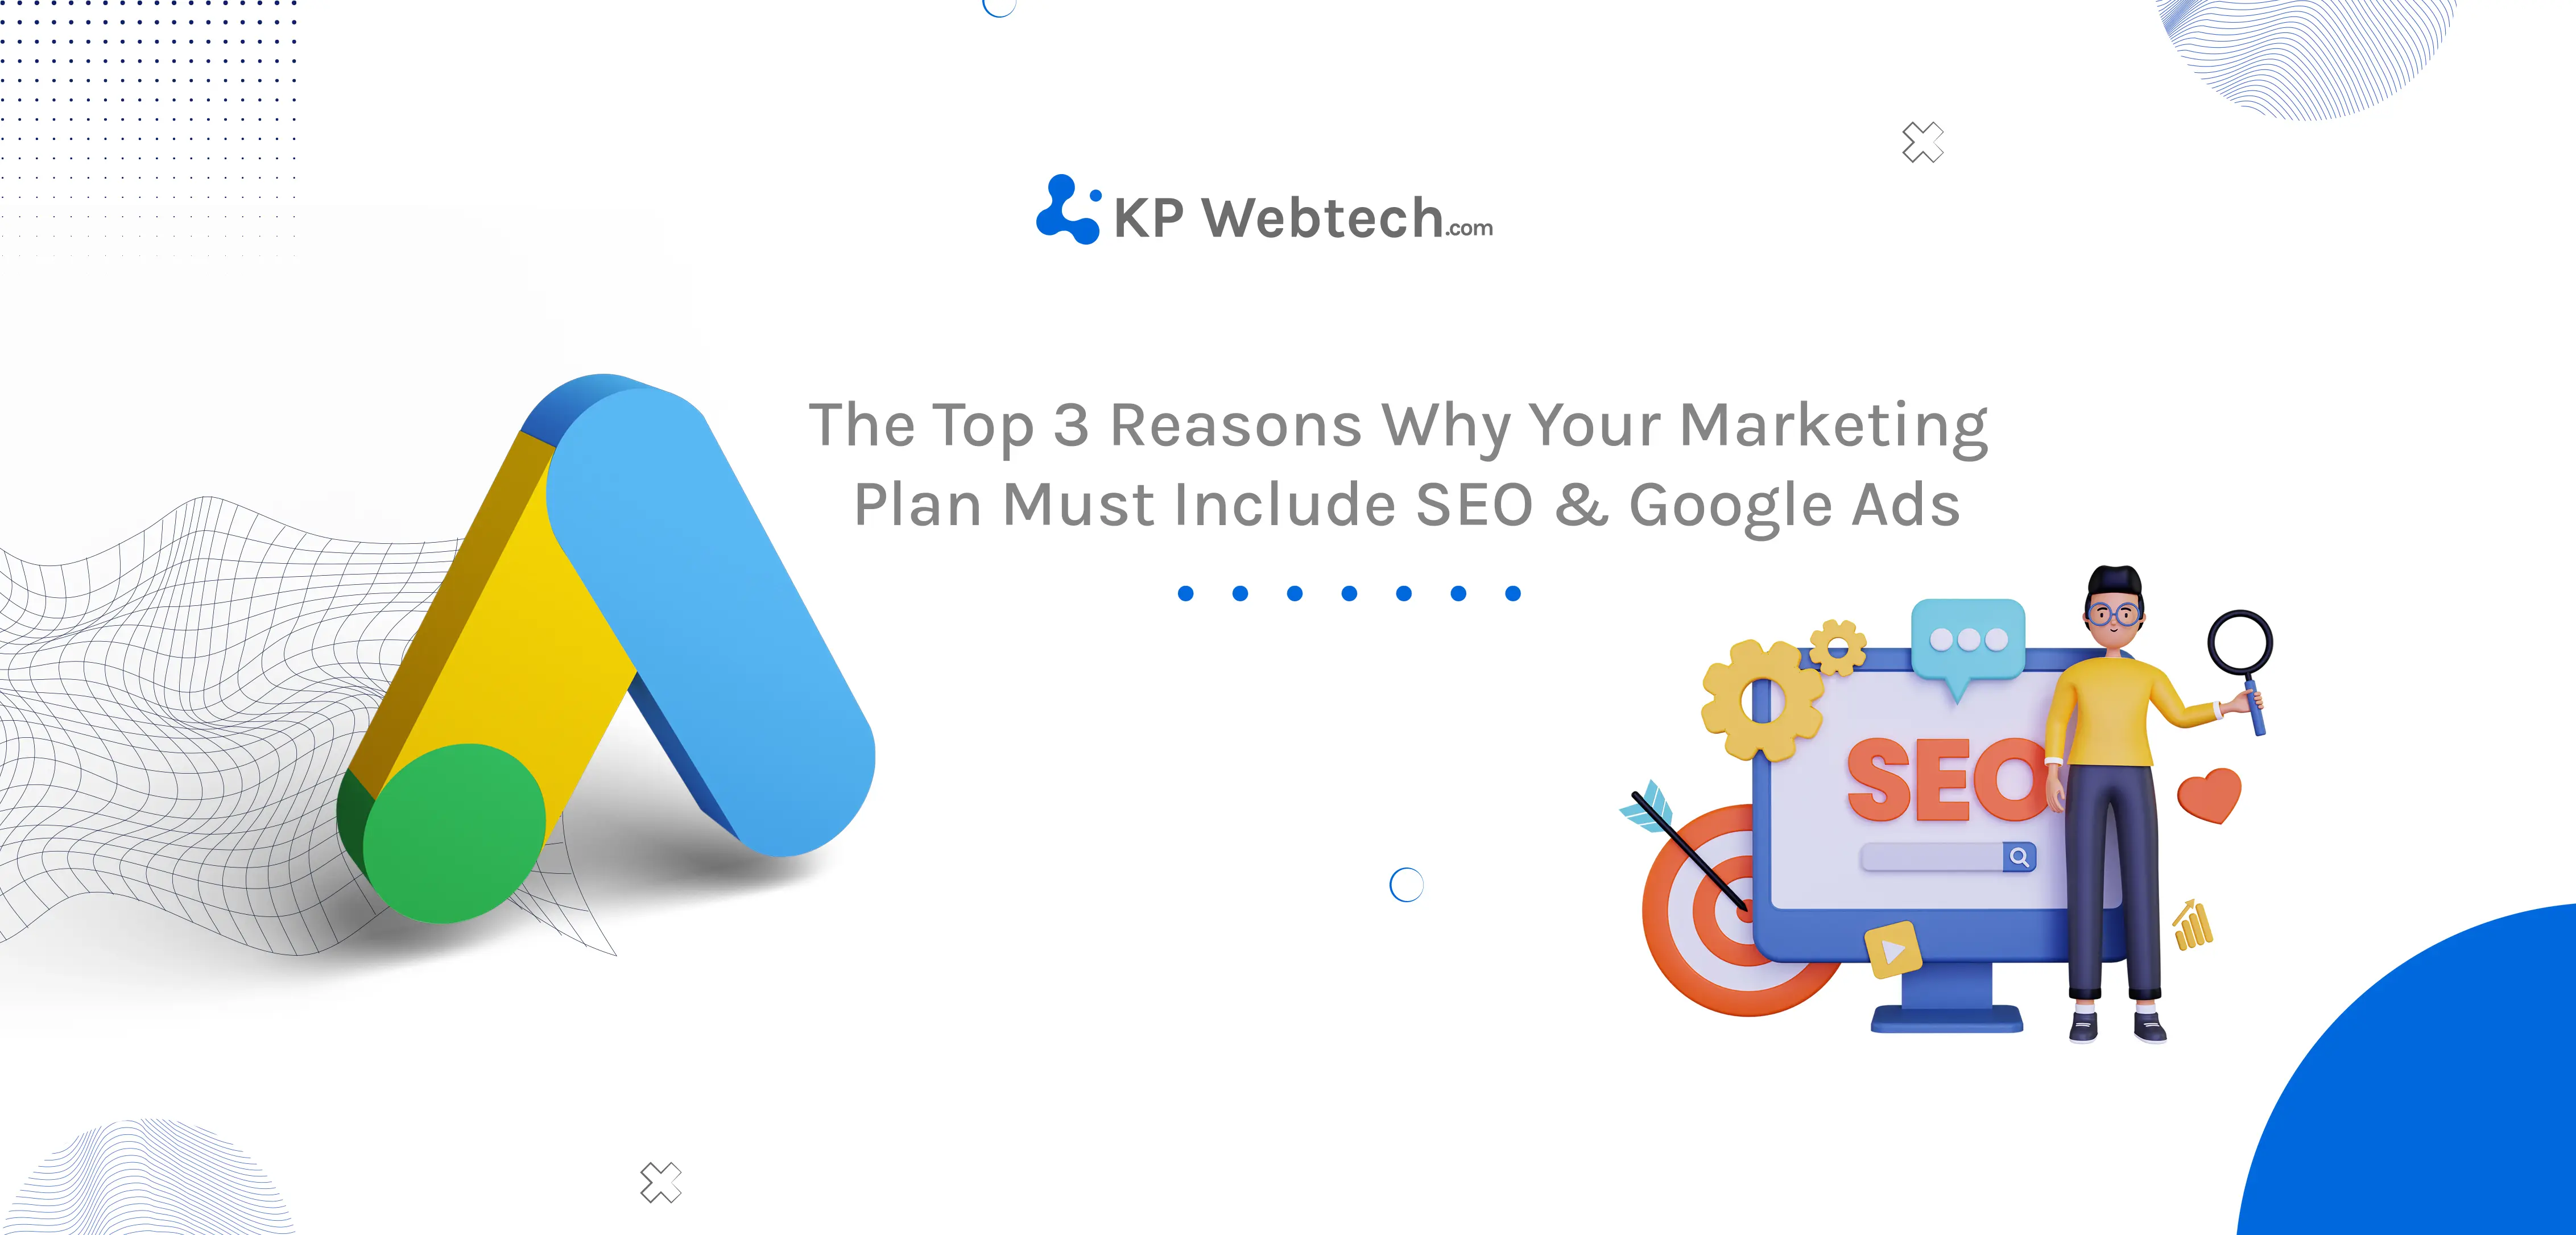 The Top 3 Reasons That SEO & Google Ads Must Be Included In Your Marketing Plan